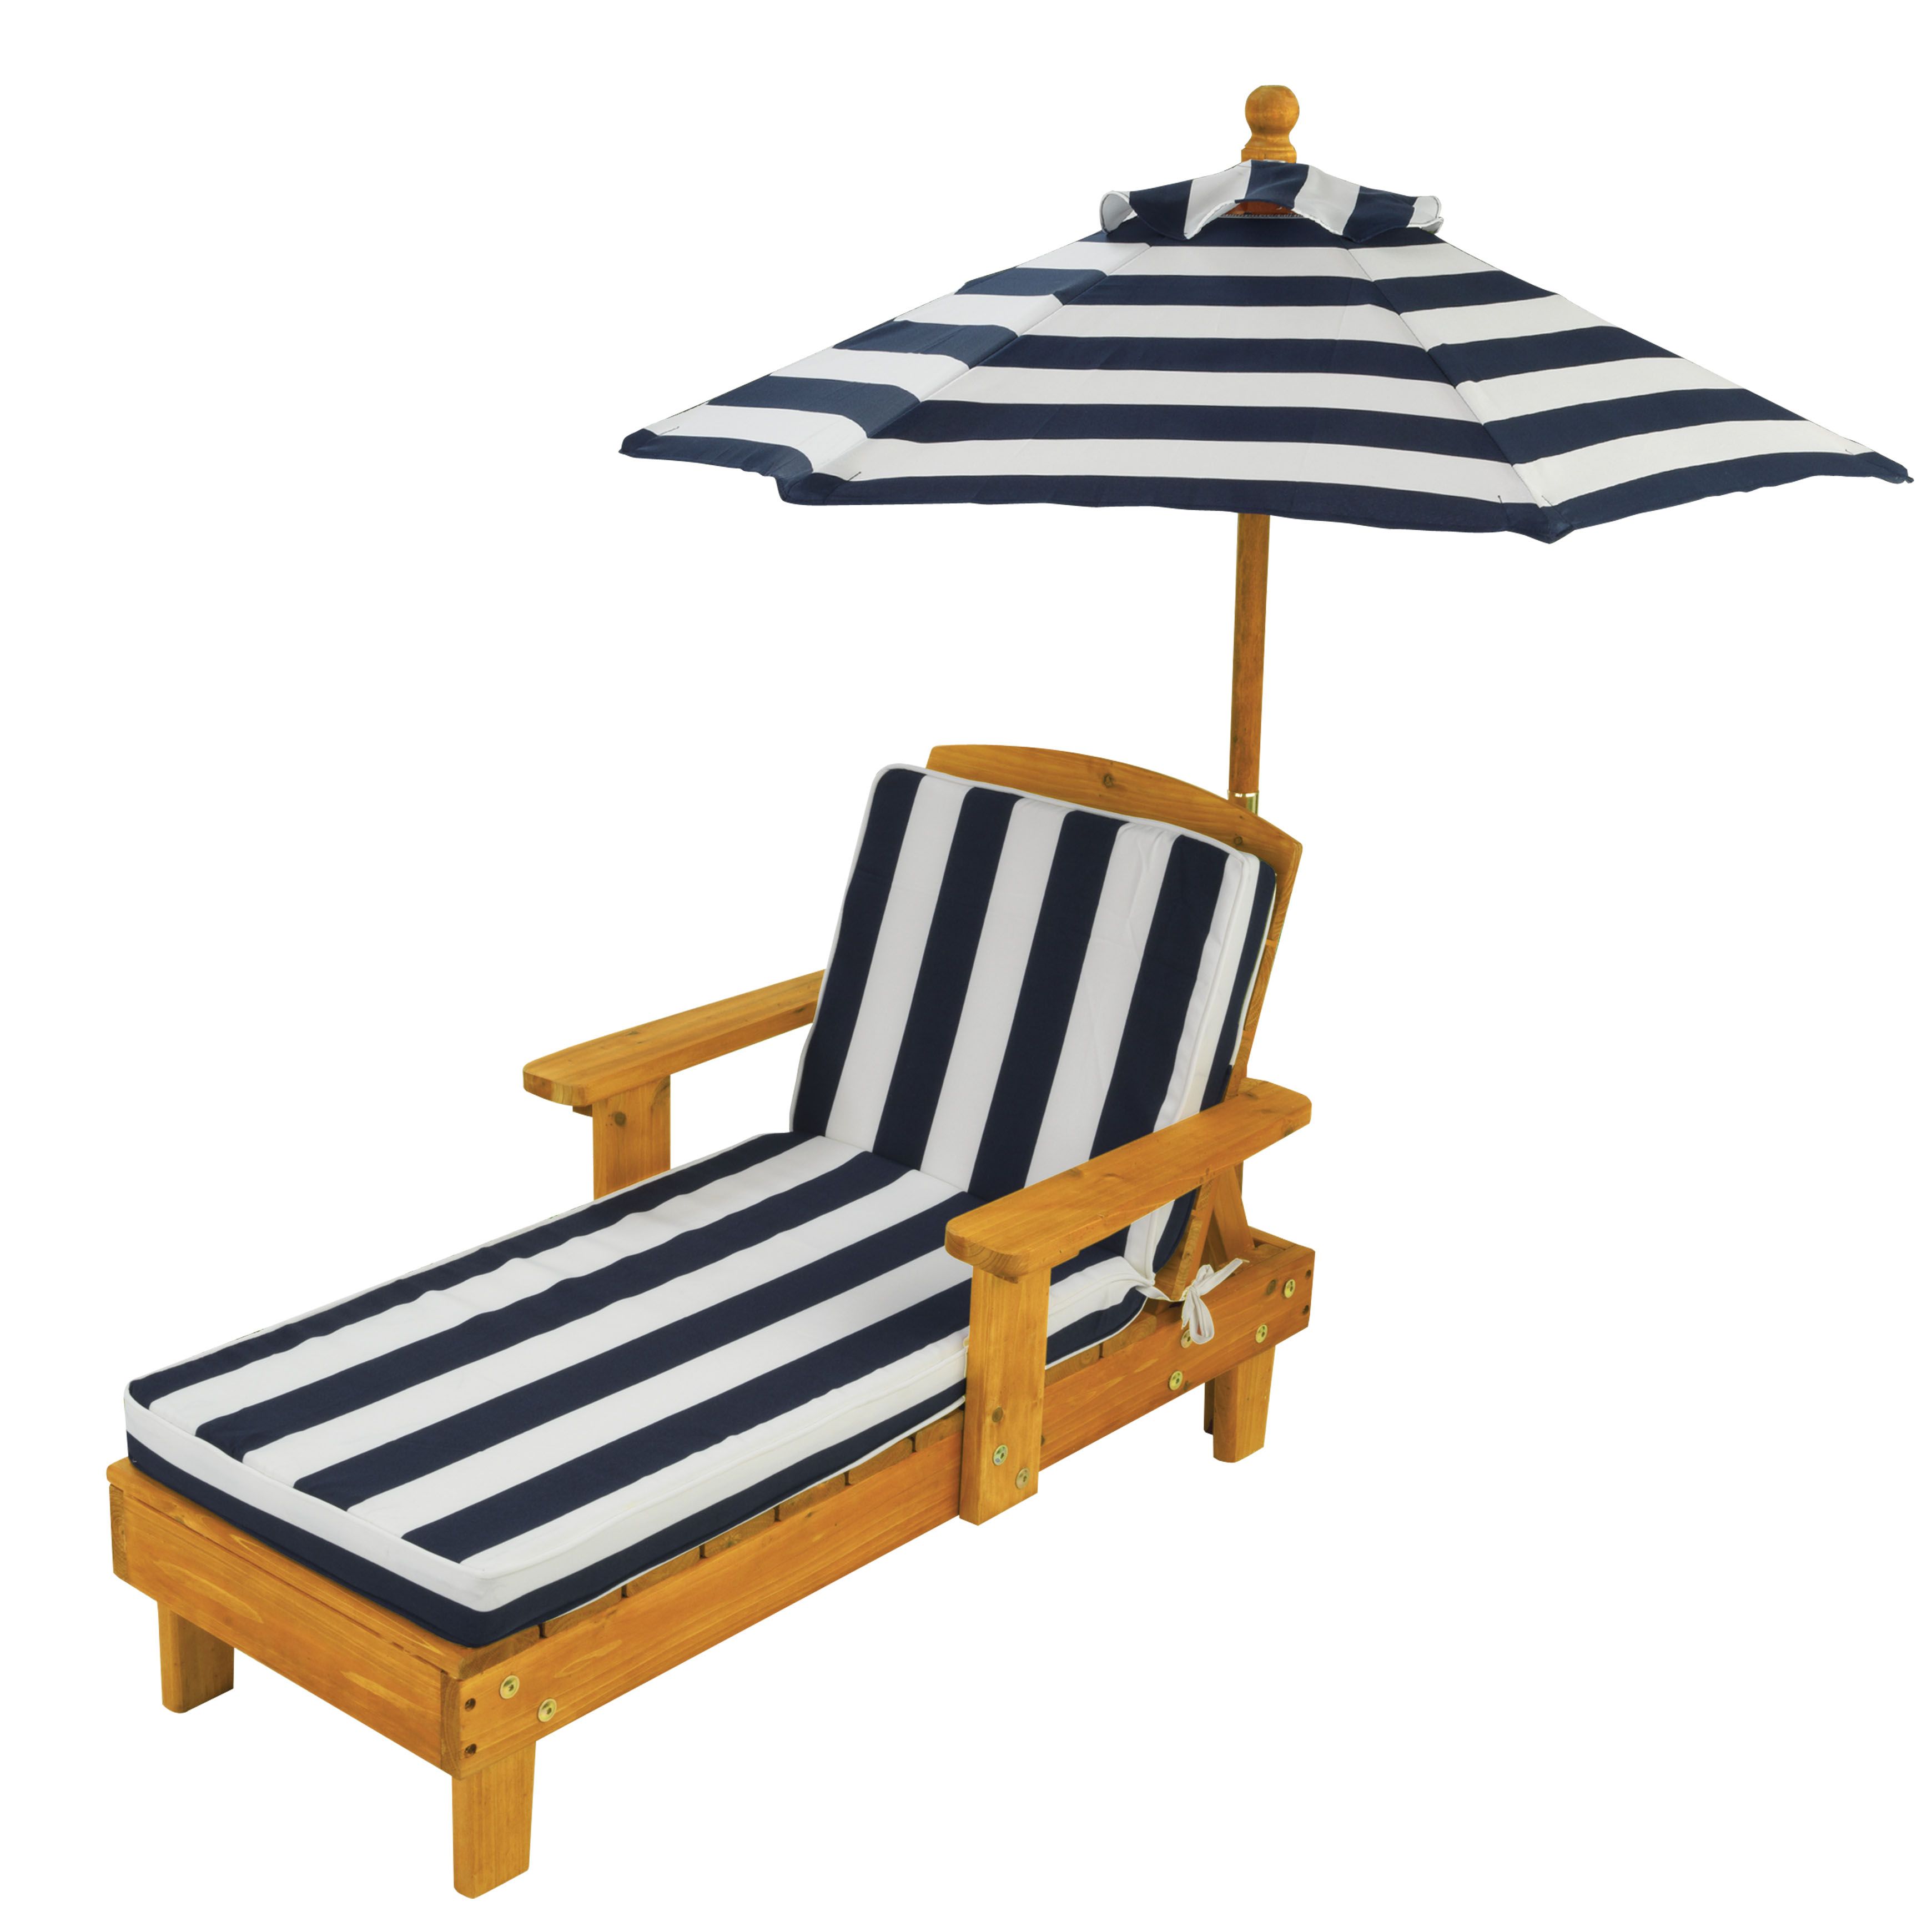 Kidkraft Outdoor Chaise With Umbrella – Navy – Walmart Within Most Current Striped Outdoor Chaises With Umbrella (View 1 of 25)